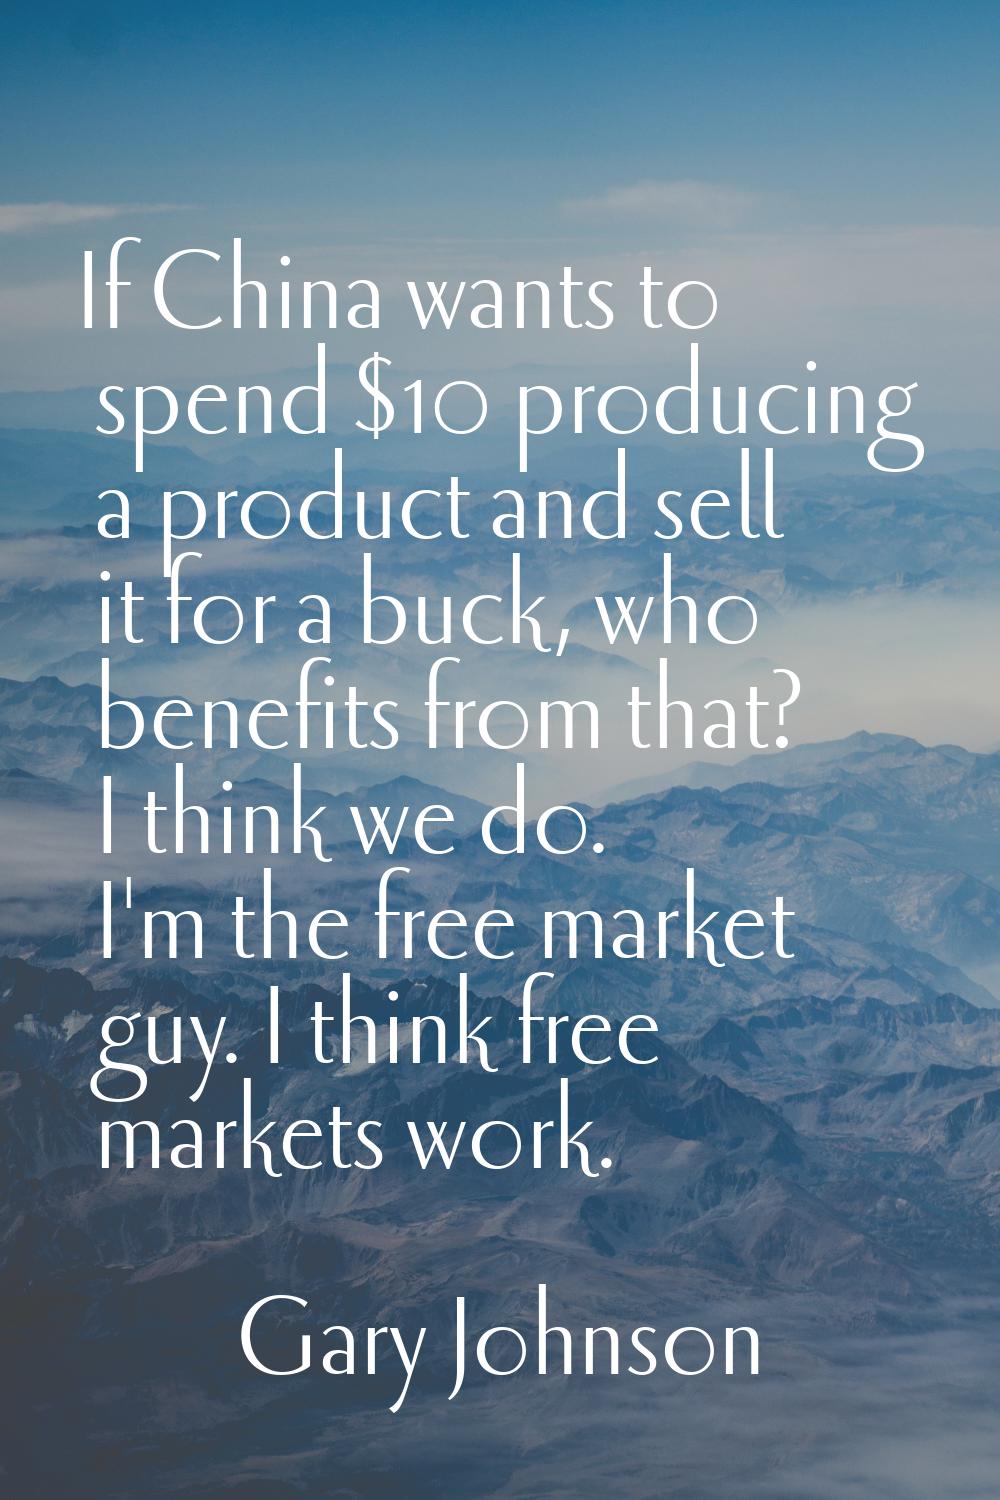 If China wants to spend $10 producing a product and sell it for a buck, who benefits from that? I t